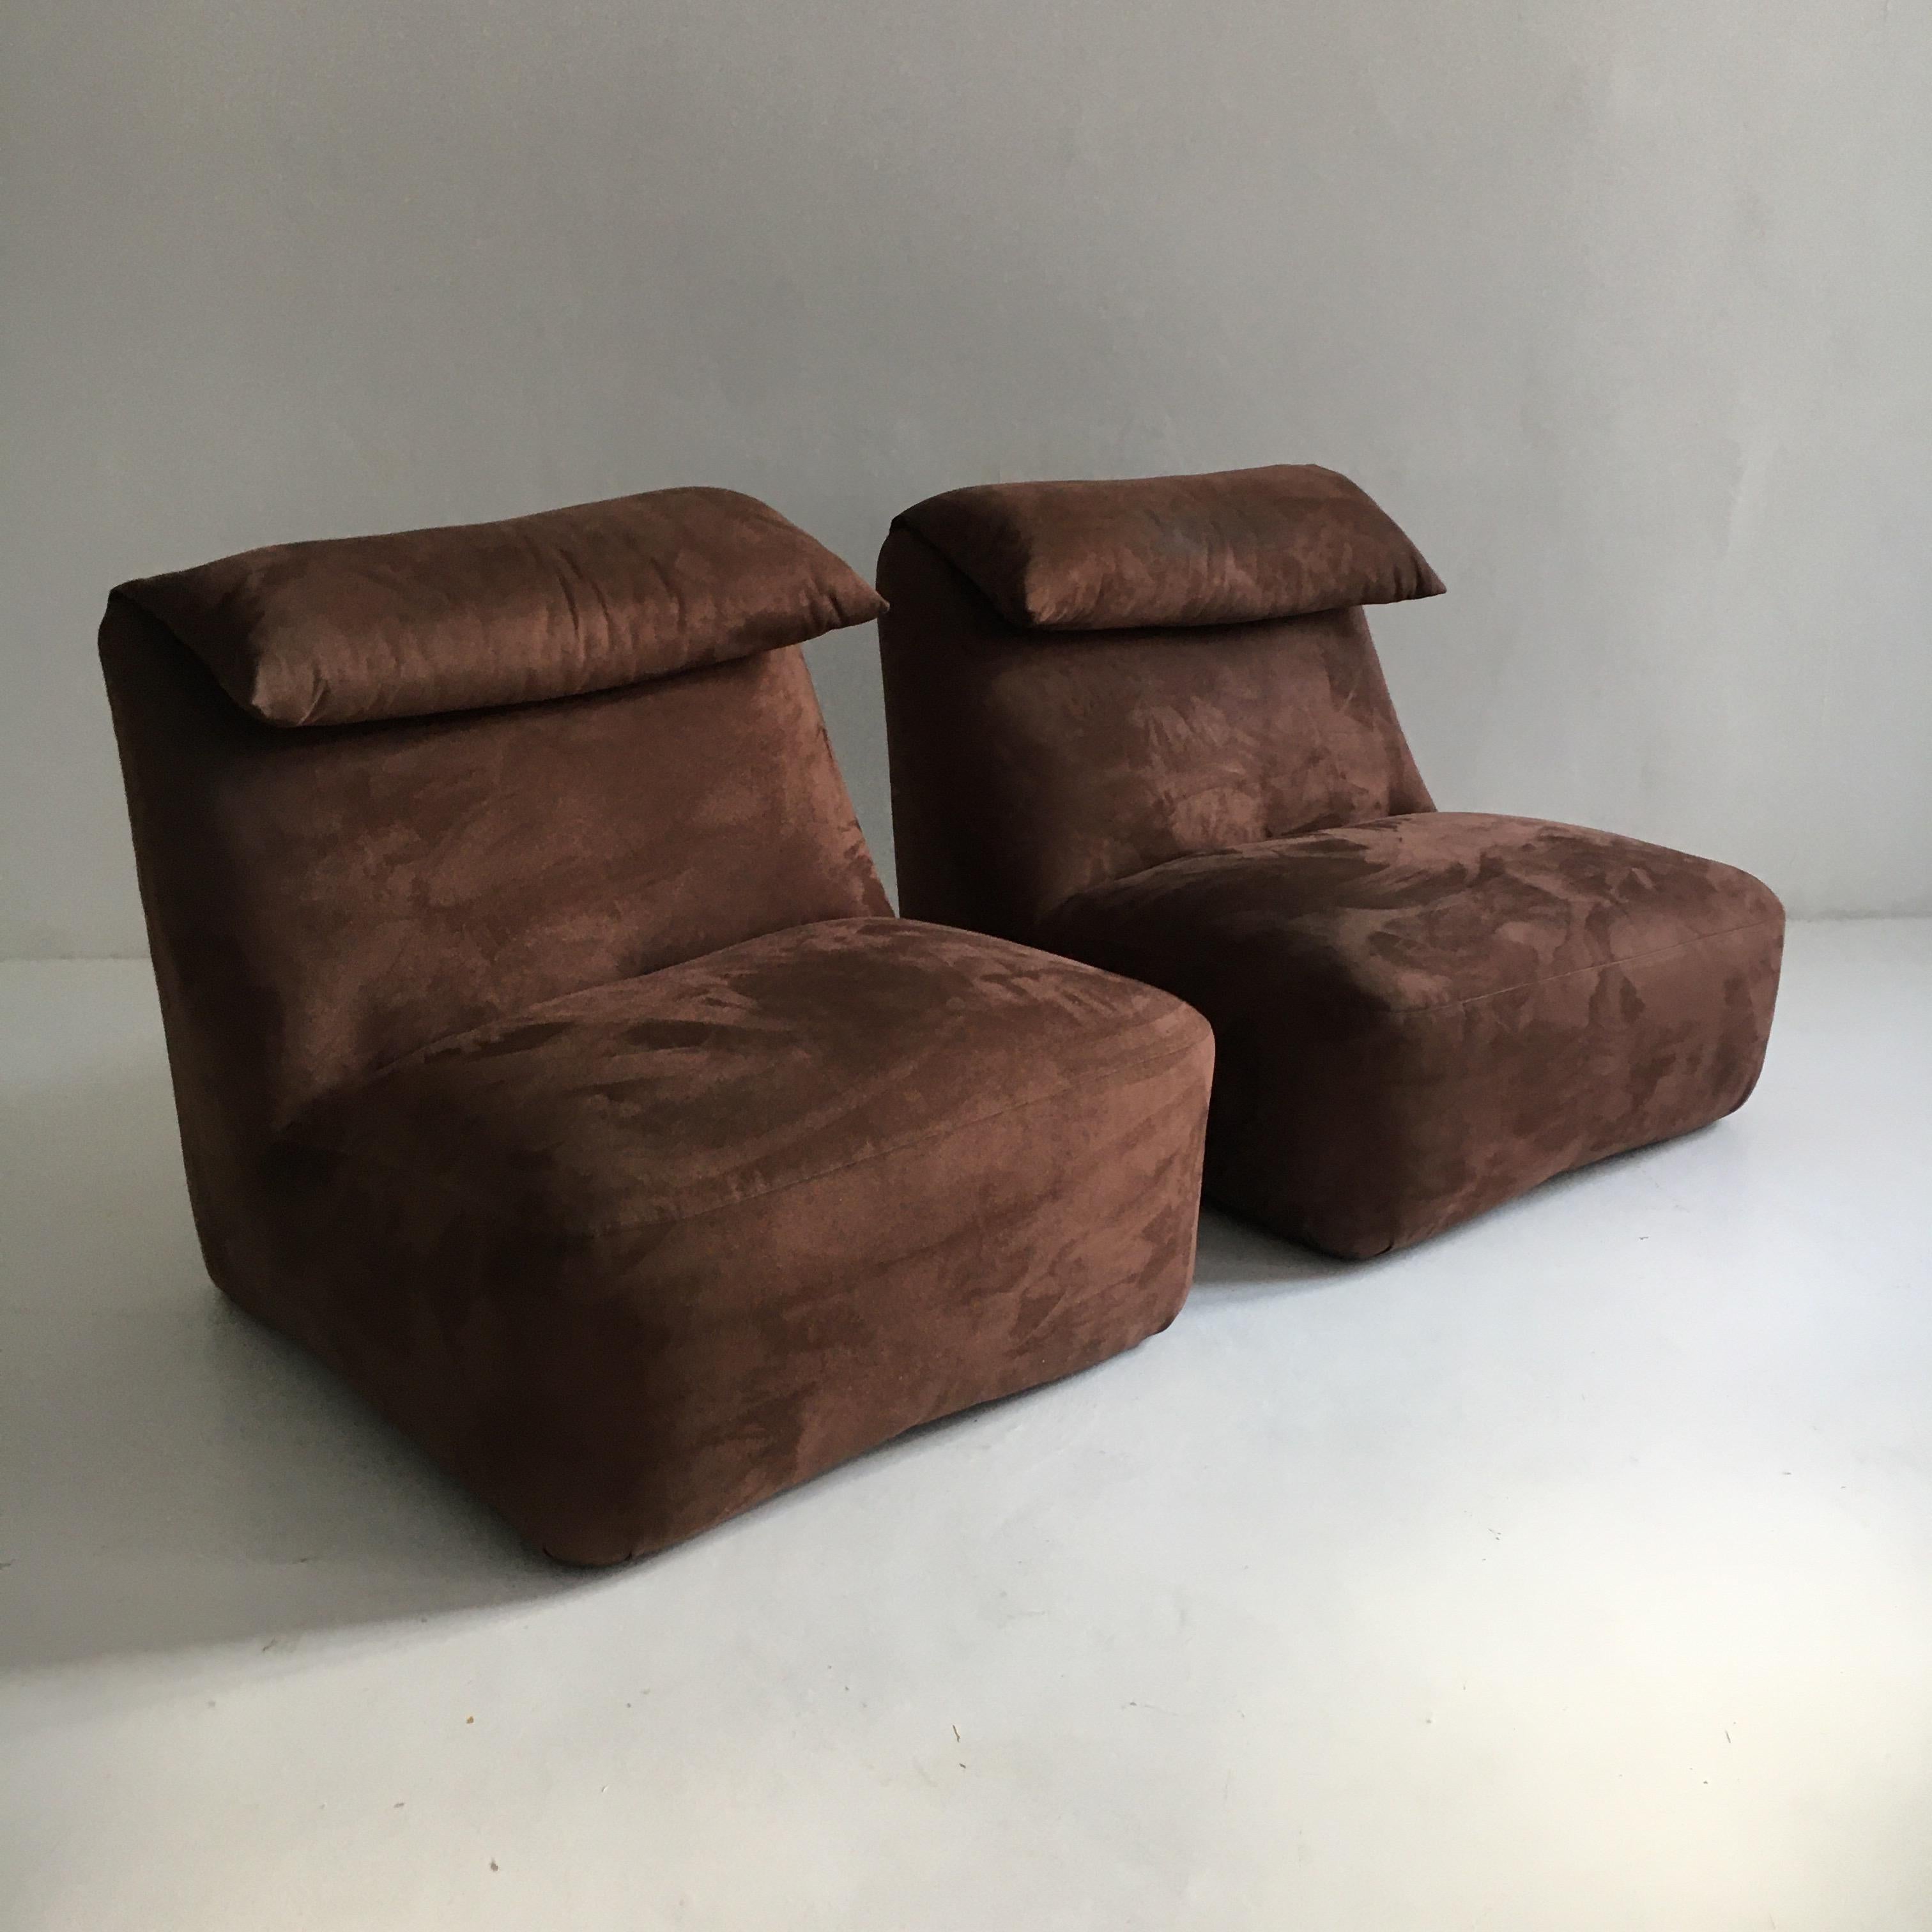 Fabric Mario Bellini Pair of 'Le Bambole' Lounge Chairs, Italy, 1970s For Sale